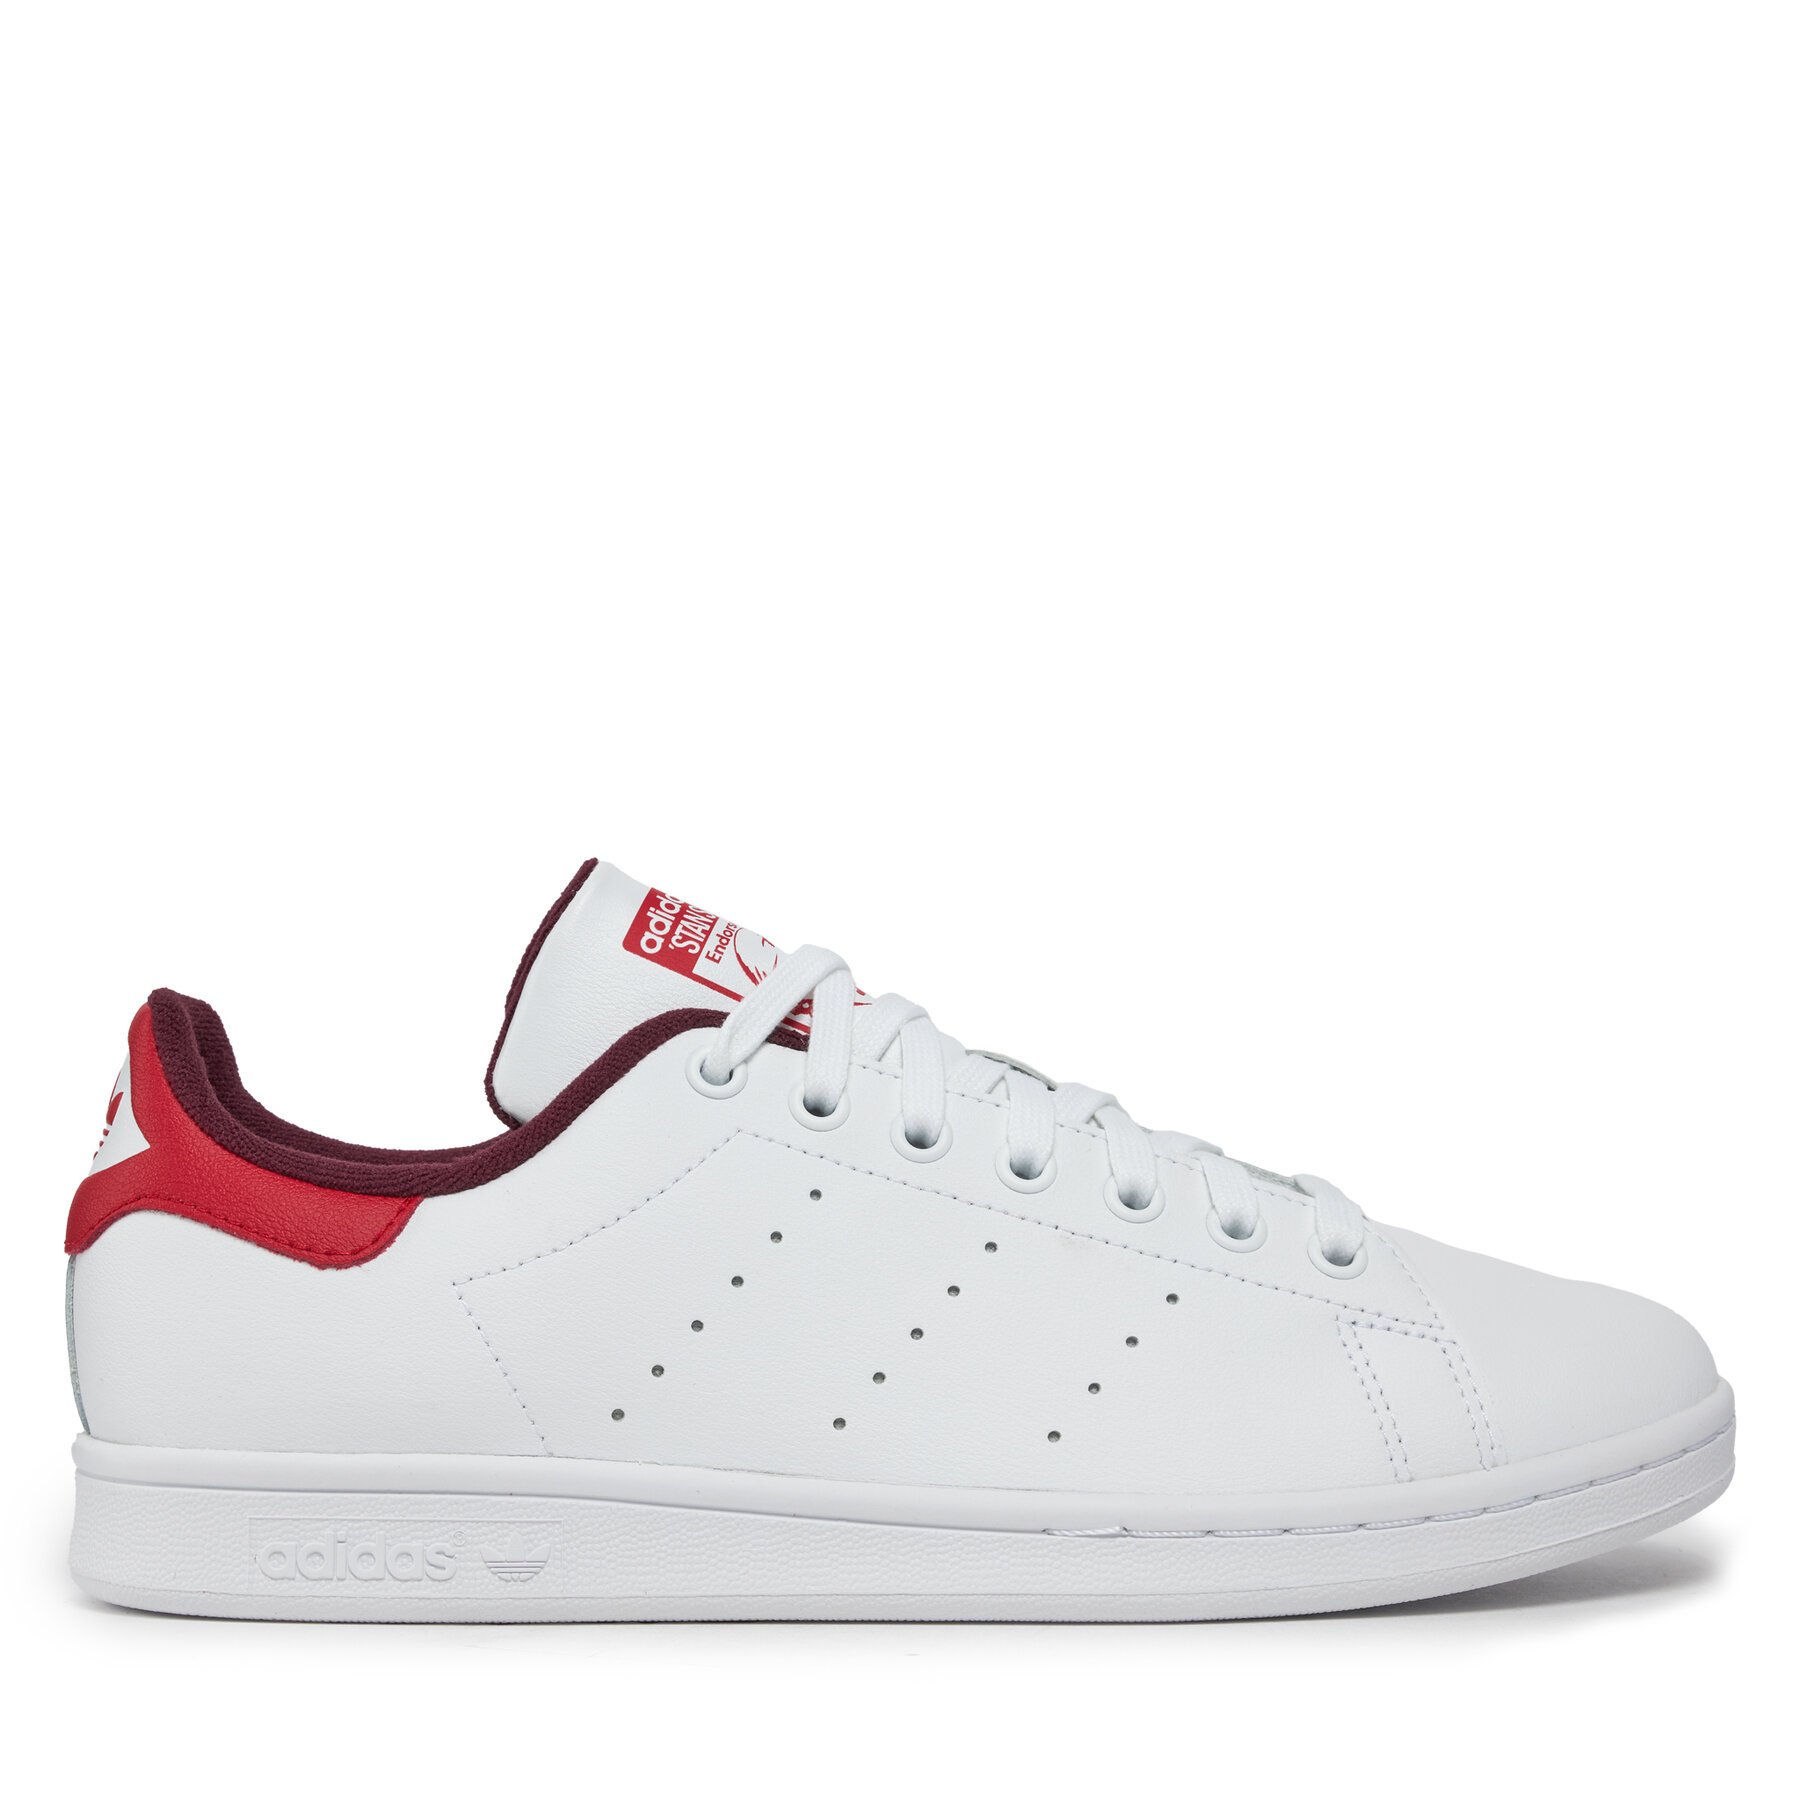 Chaussures adidas Stan Smith IG1321 Ftwwht/Maroon/Betsca